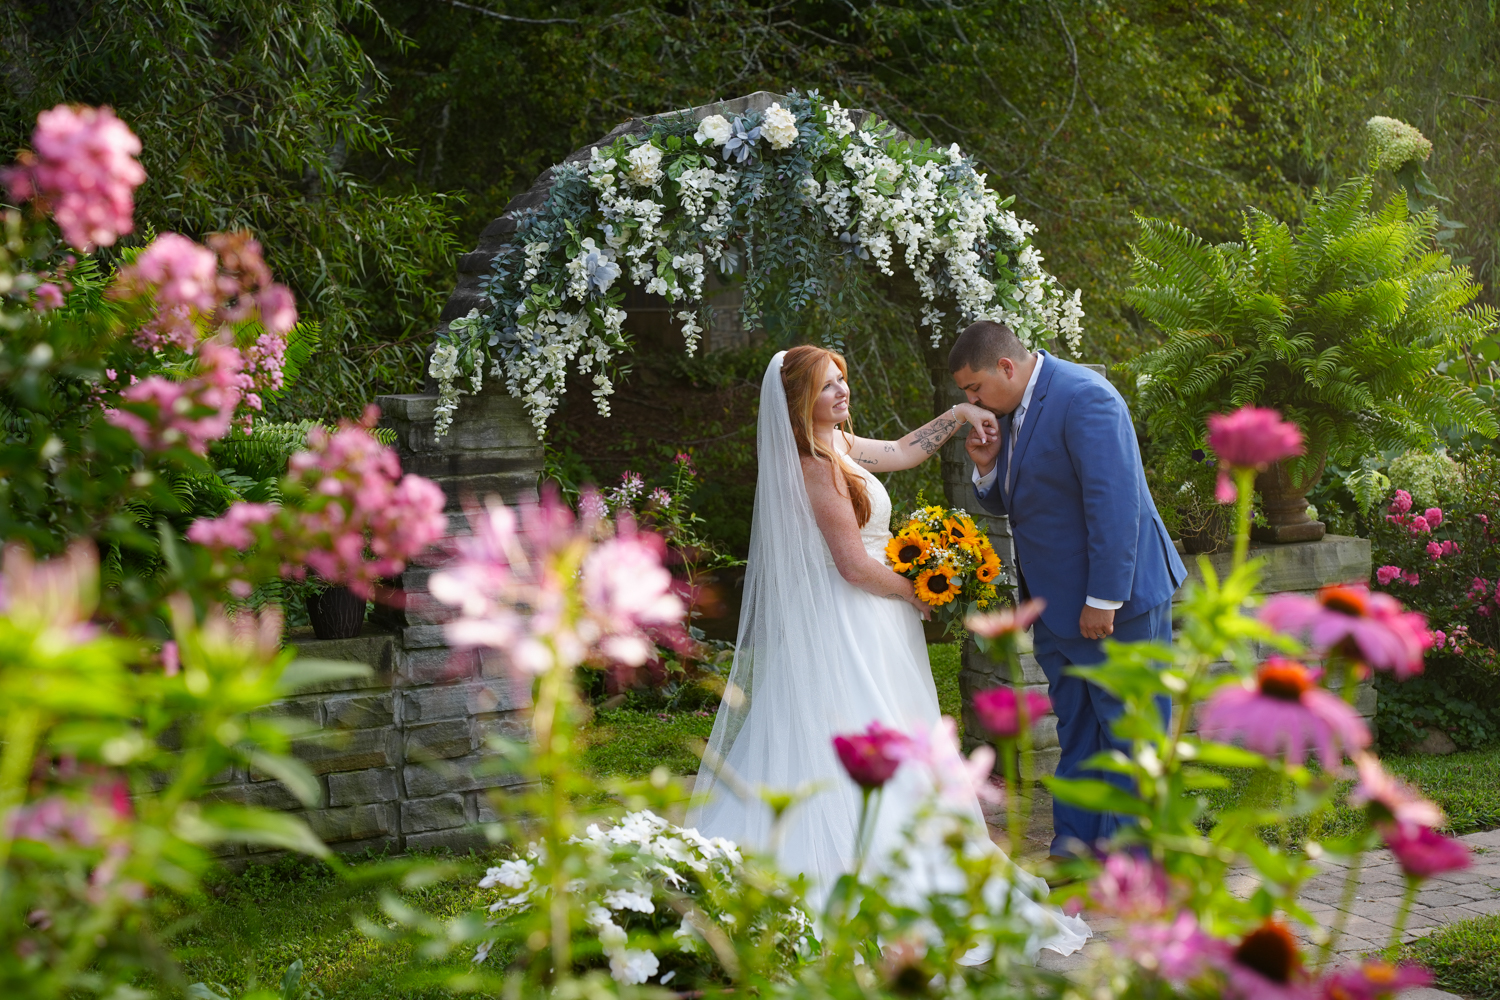 Pink flowers blooming at a stone arch where a groom is kissing his bride's hand